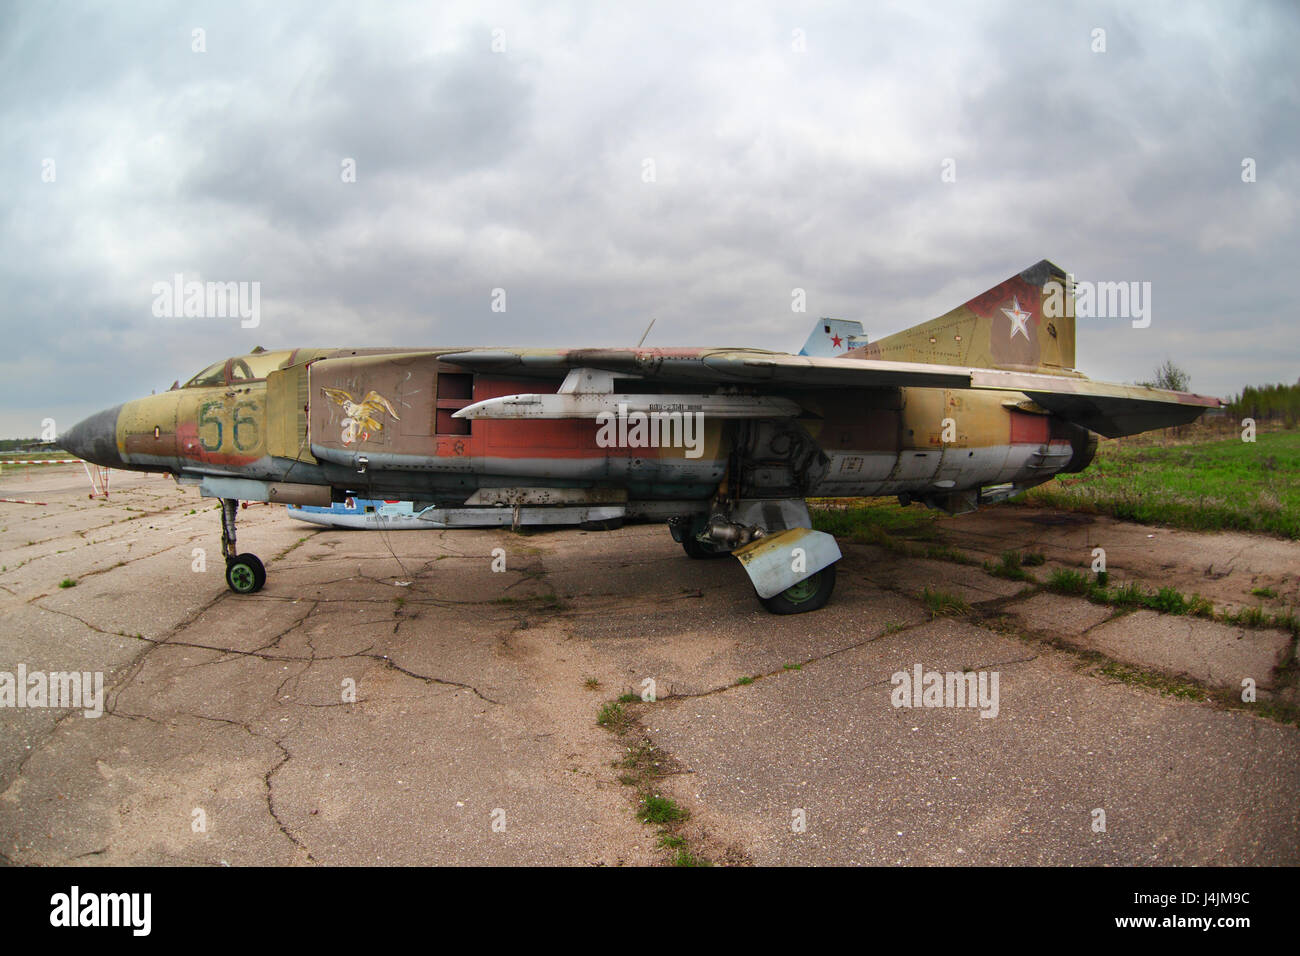 KUBINKA, MOSCOW REGION, RUSSIA - MAY 6, 2011: Mikoyan MiG-23 56 BLUE jet fighter of Russian air force on storage at Kubinka air force base. Stock Photo